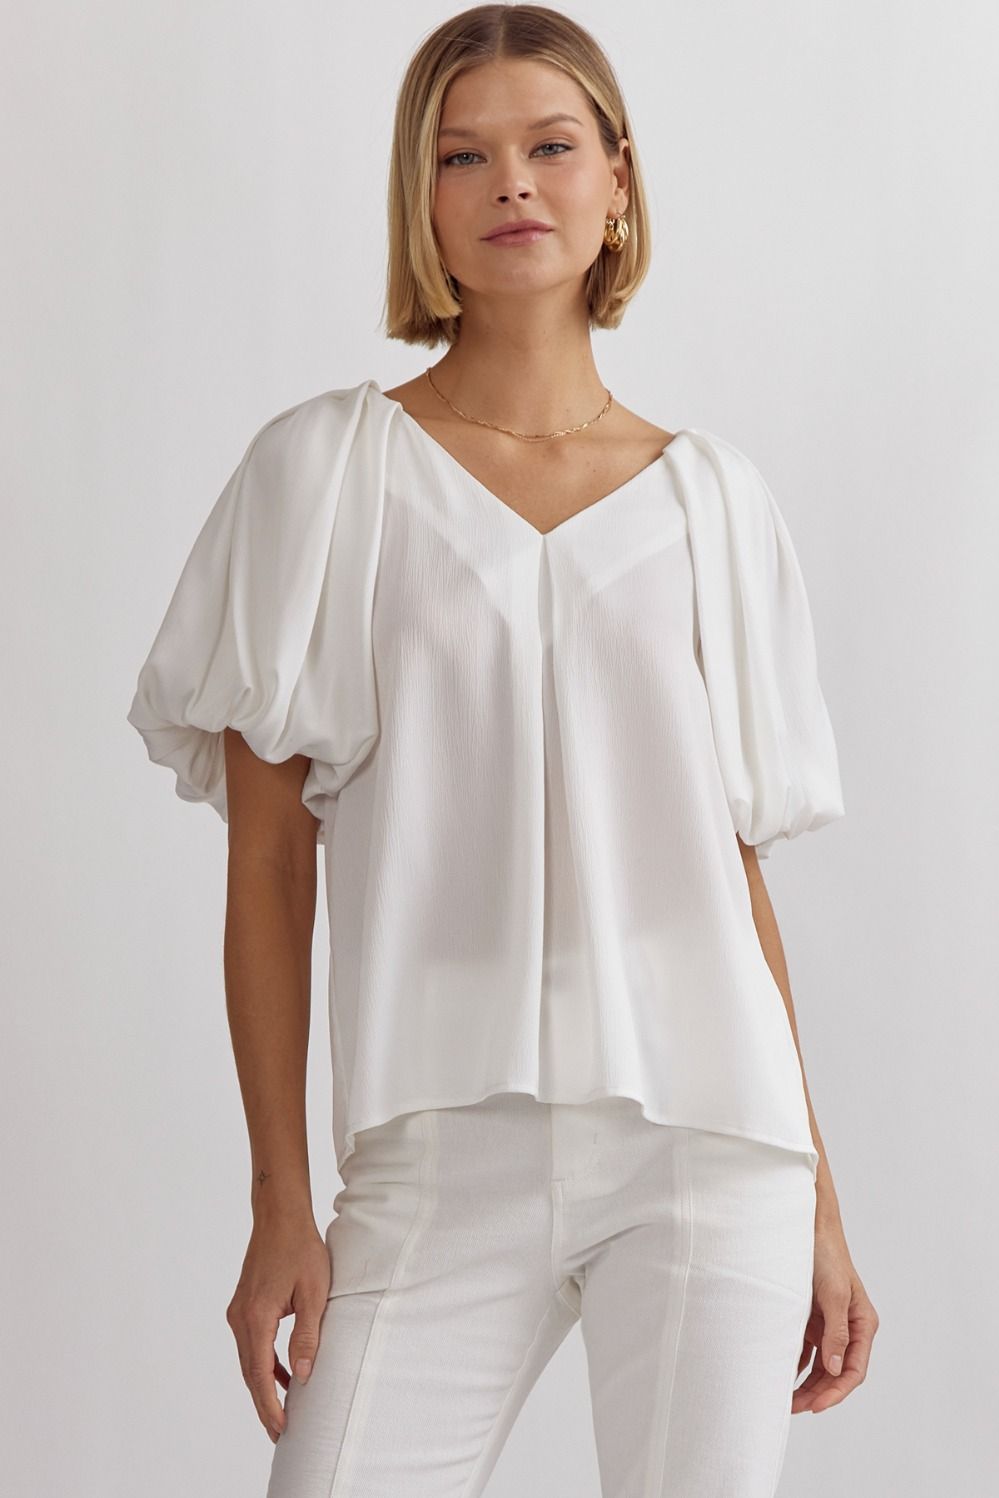 ENTRO INC Women's Top OFFWHITE / S Solid Satin V-Neck Bubble Sleeve Top || David's Clothing T21321